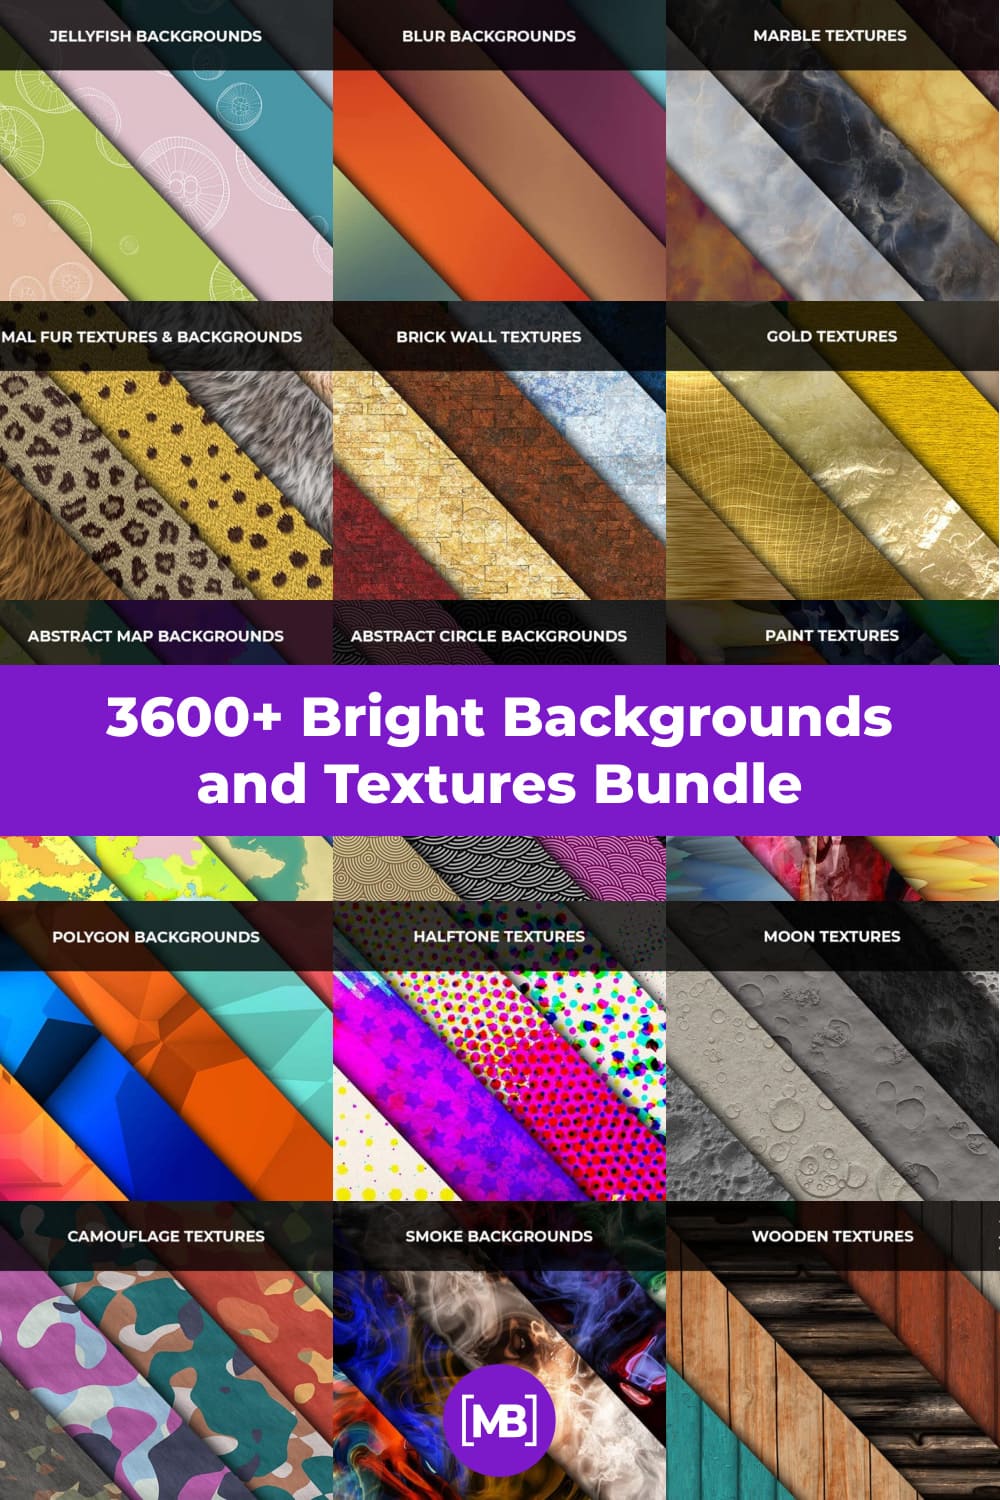 This is 3600+ Backgrounds And Textures Bundle with 3600+ abstract backgrounds and textures, ideal for your project or design, size 3000x3000px, jpg format.